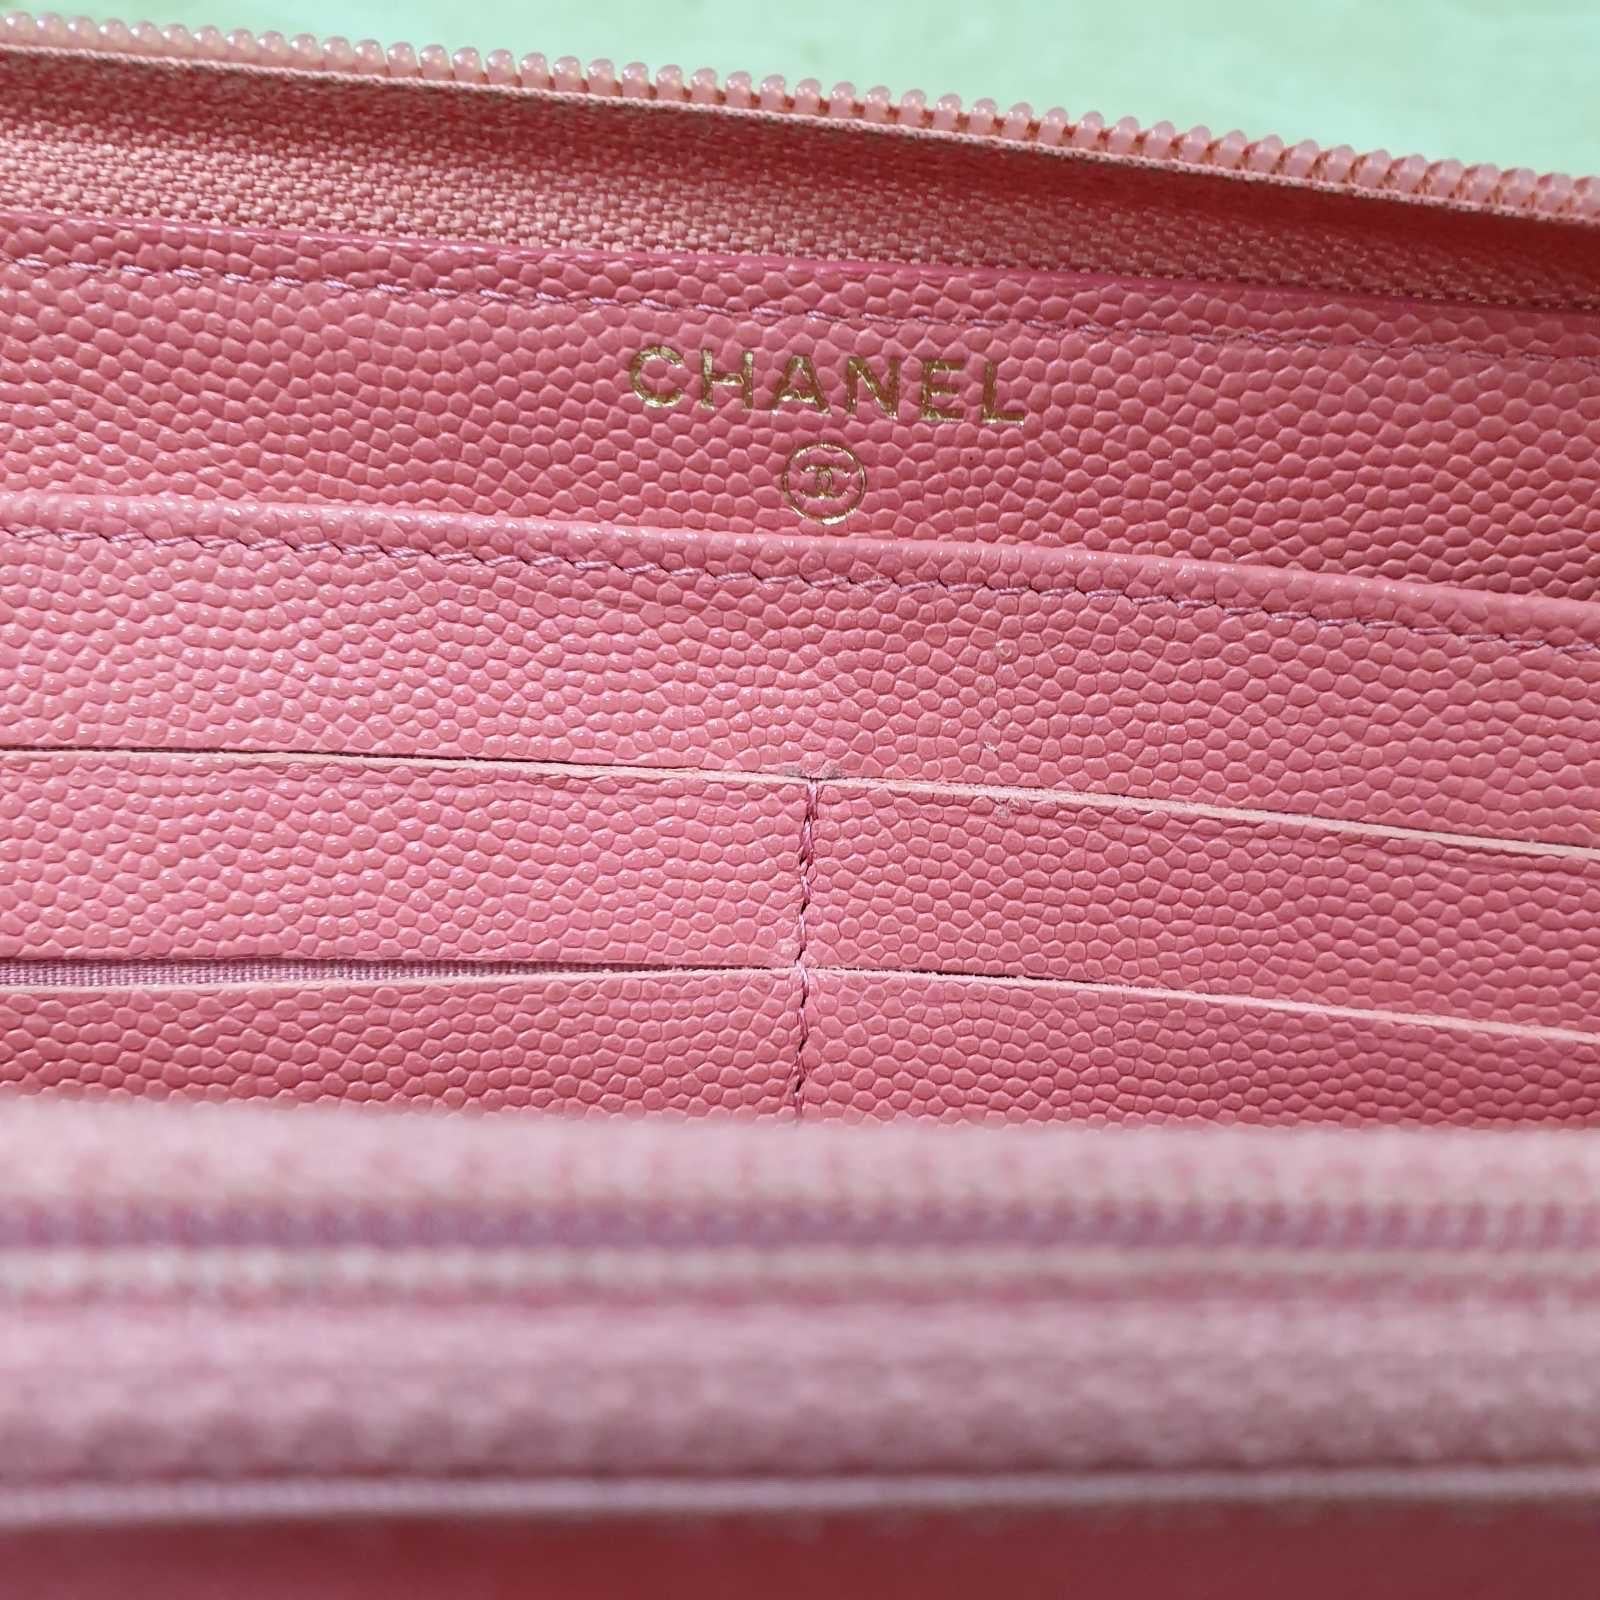 Chanel CC Pink Caviar Leather Wallet For Sale 8